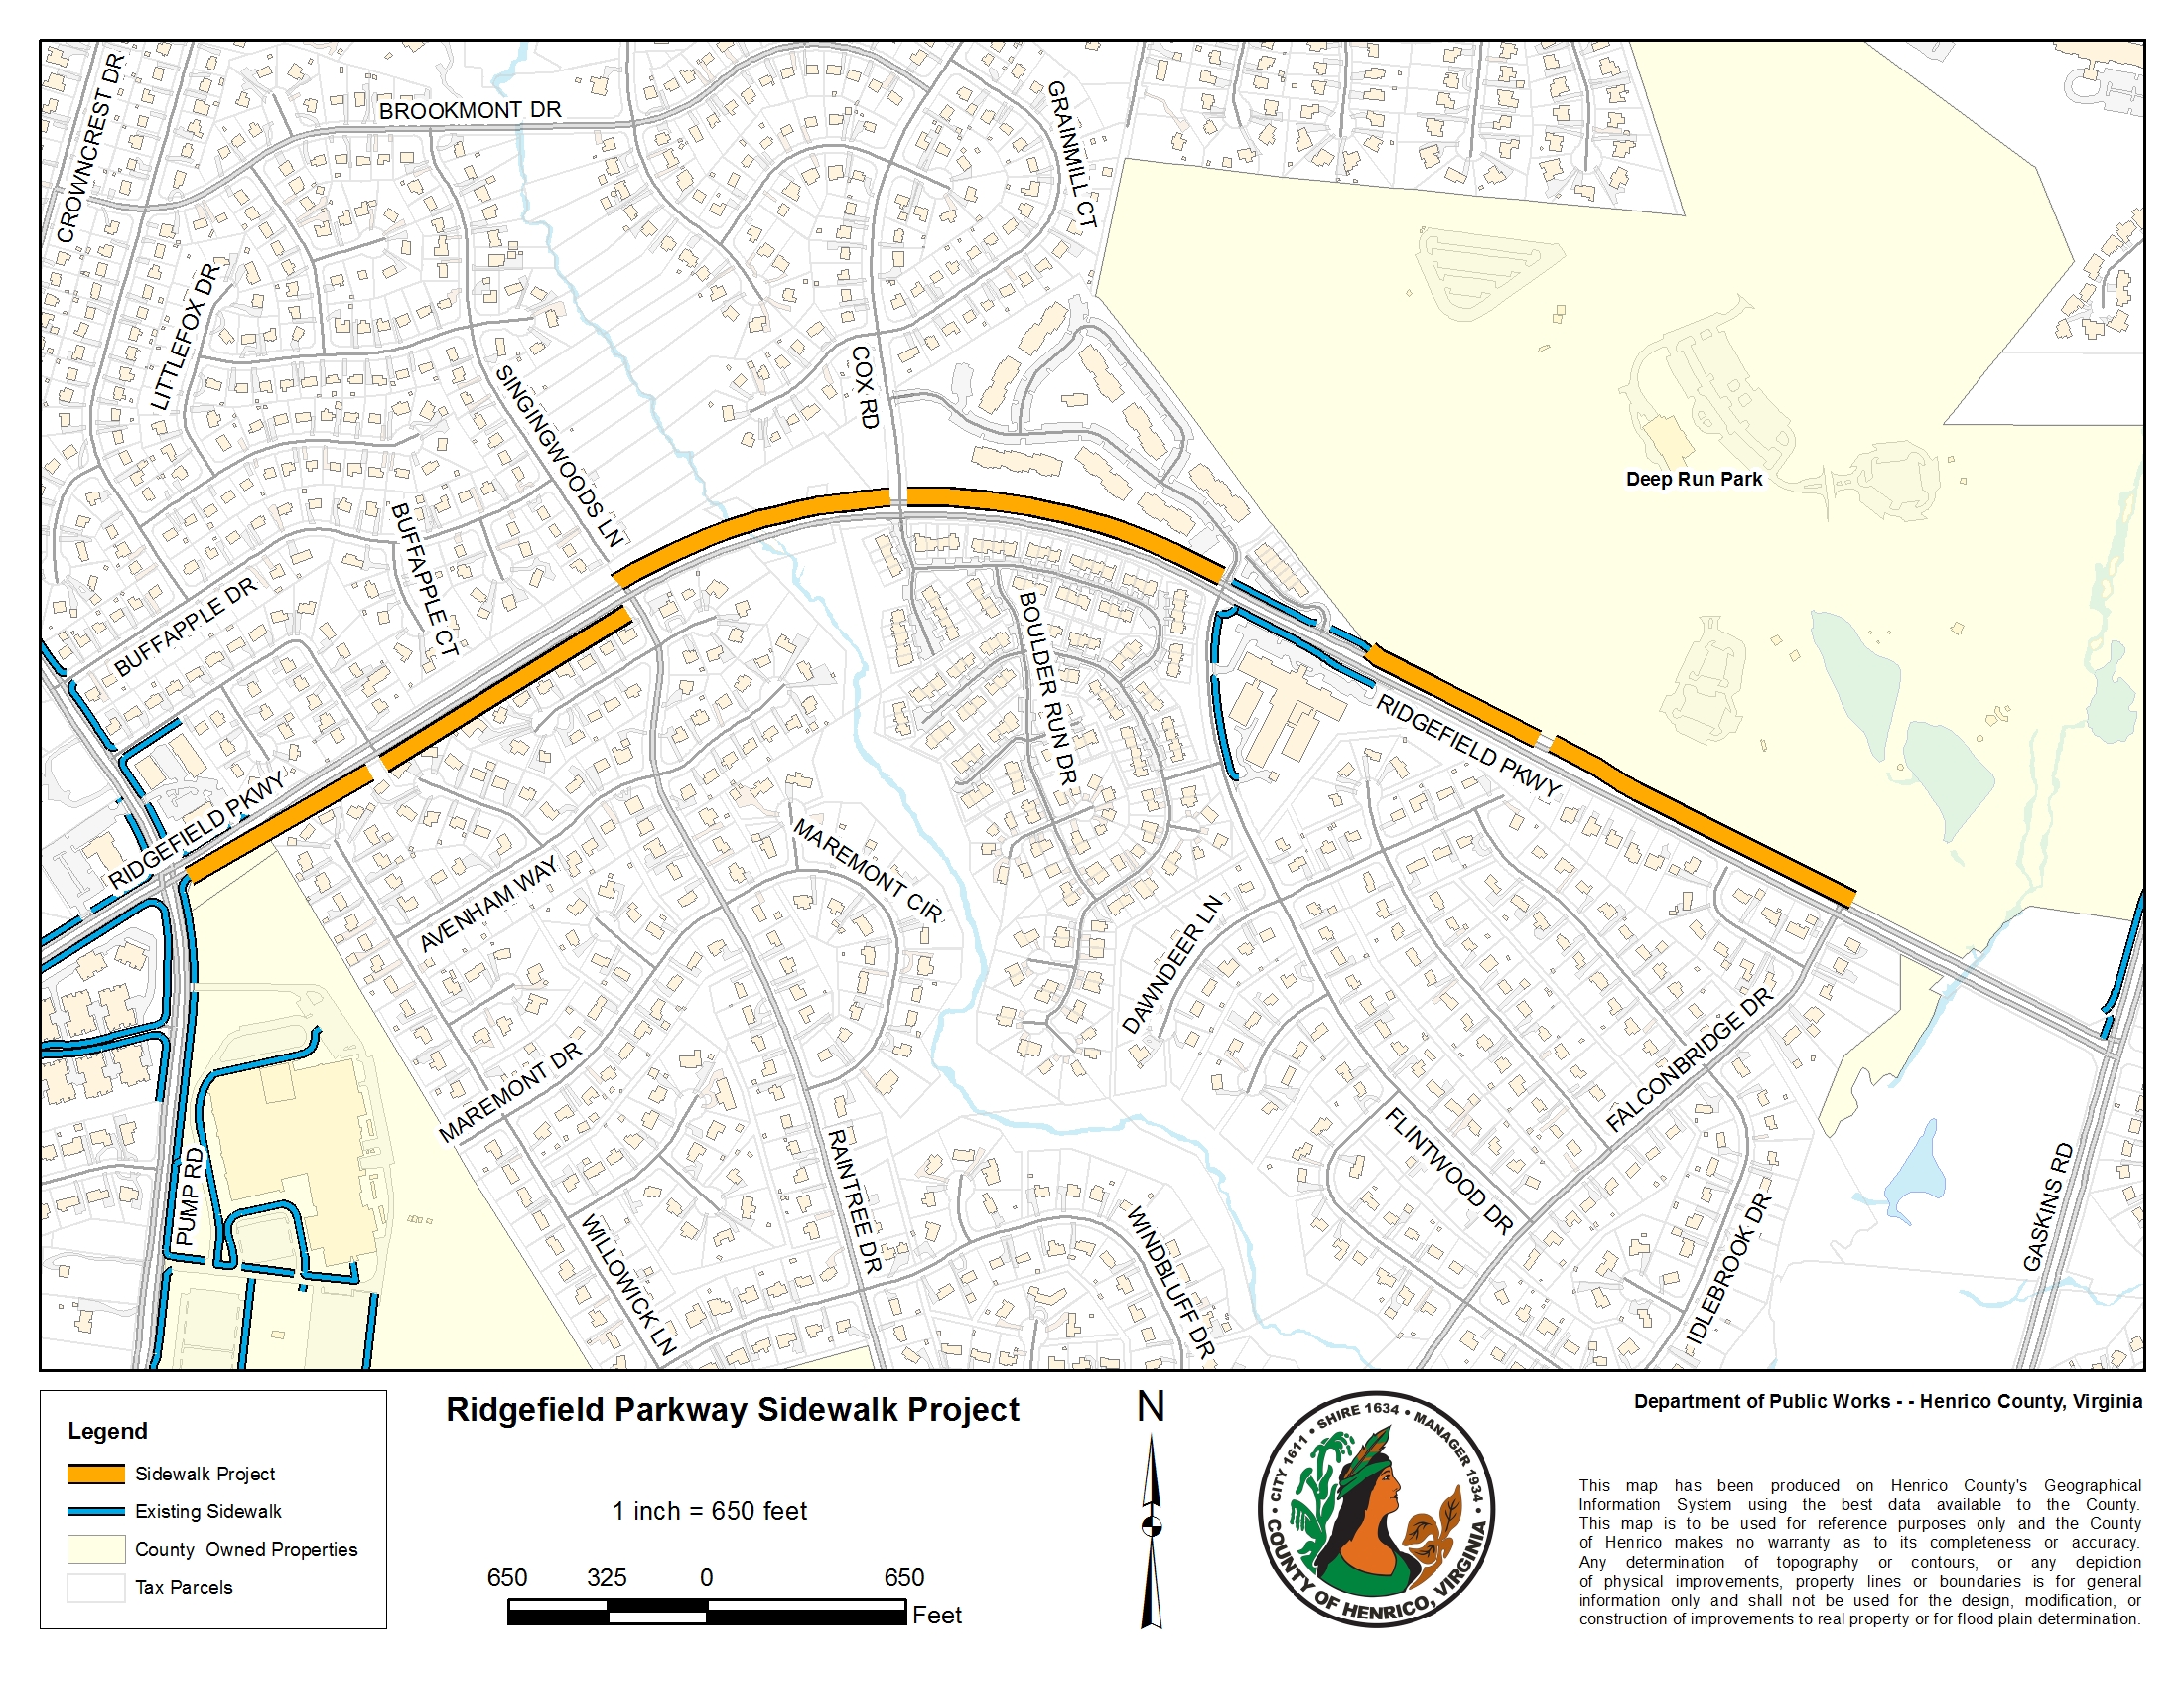 An overall map showing the location of the Ridgefield Parkway sidewalk project for reference purposes.